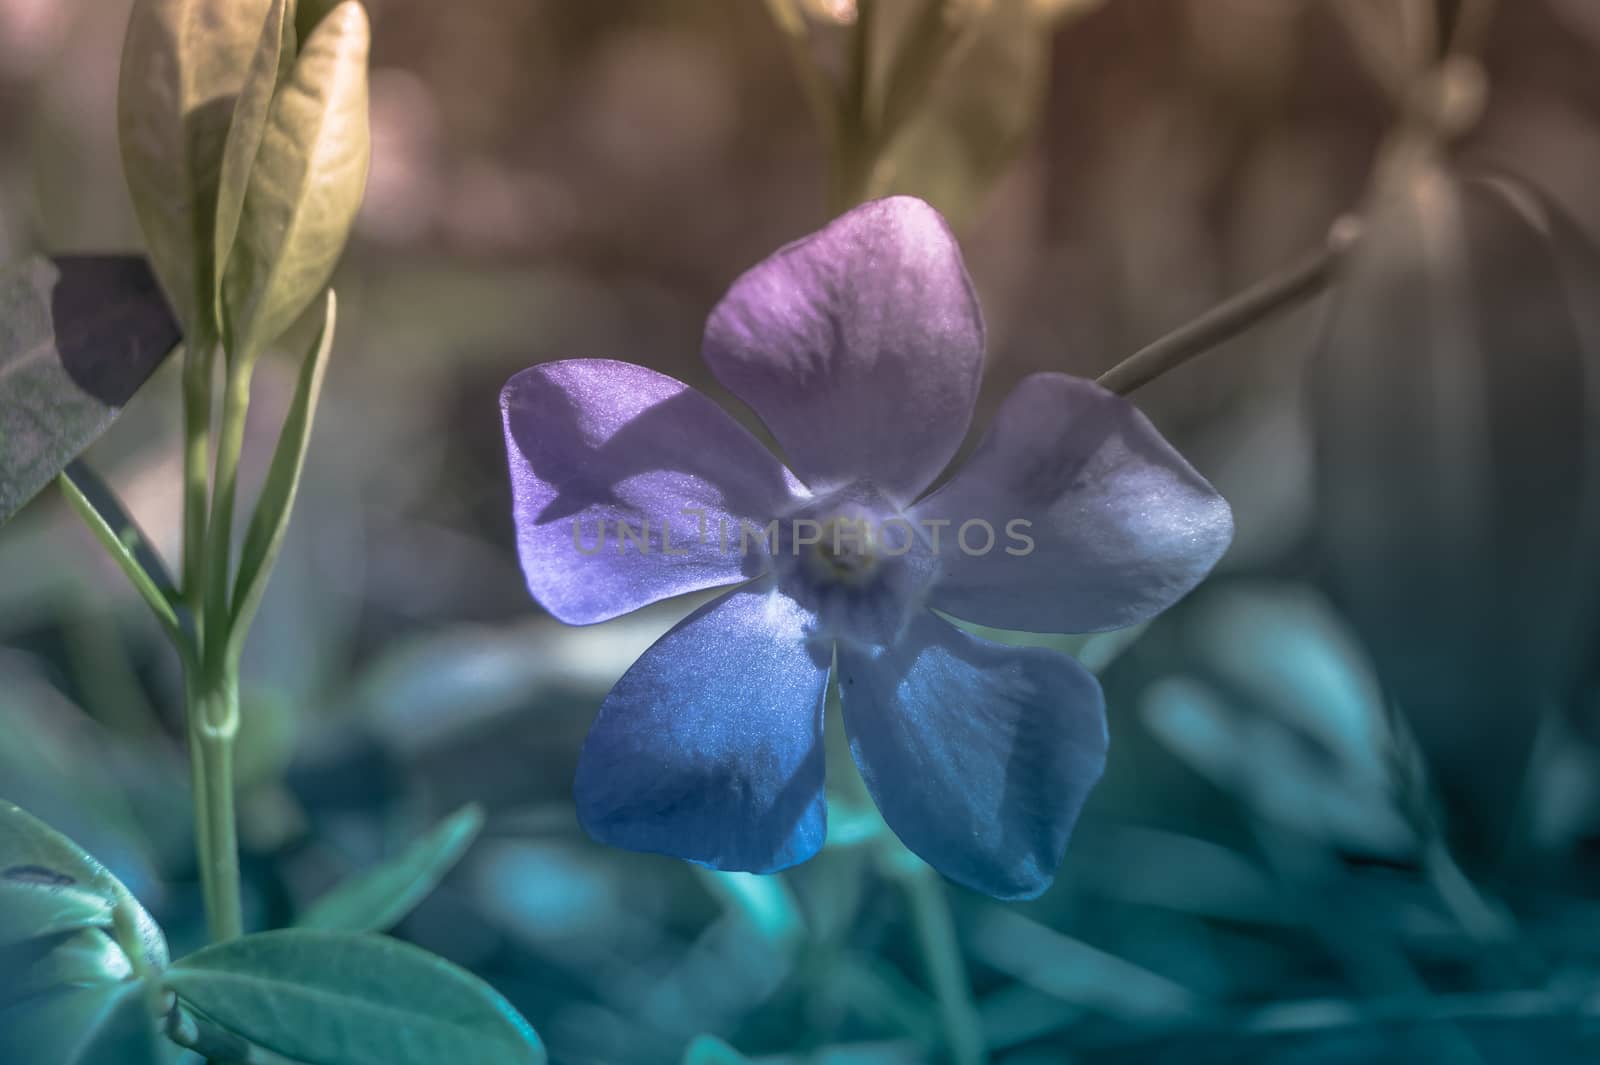 periwinkle flower on a colored background by Oleczka11